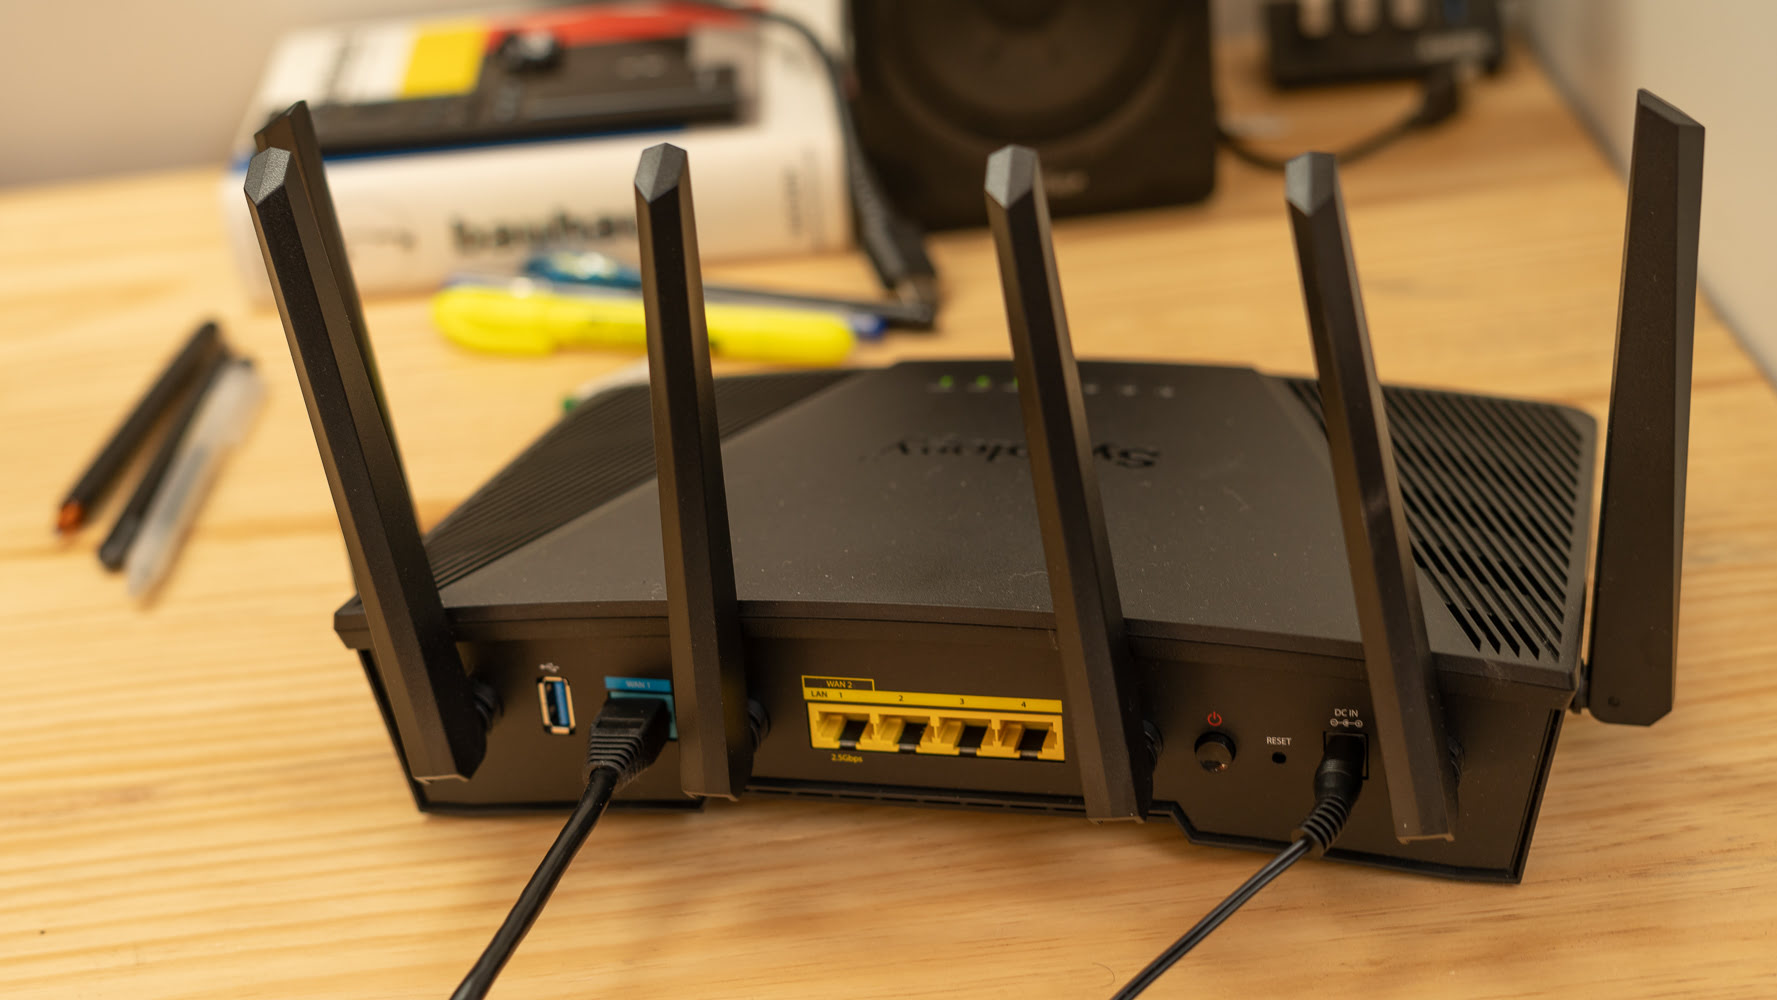 How To Reboot Your Wi-Fi Router